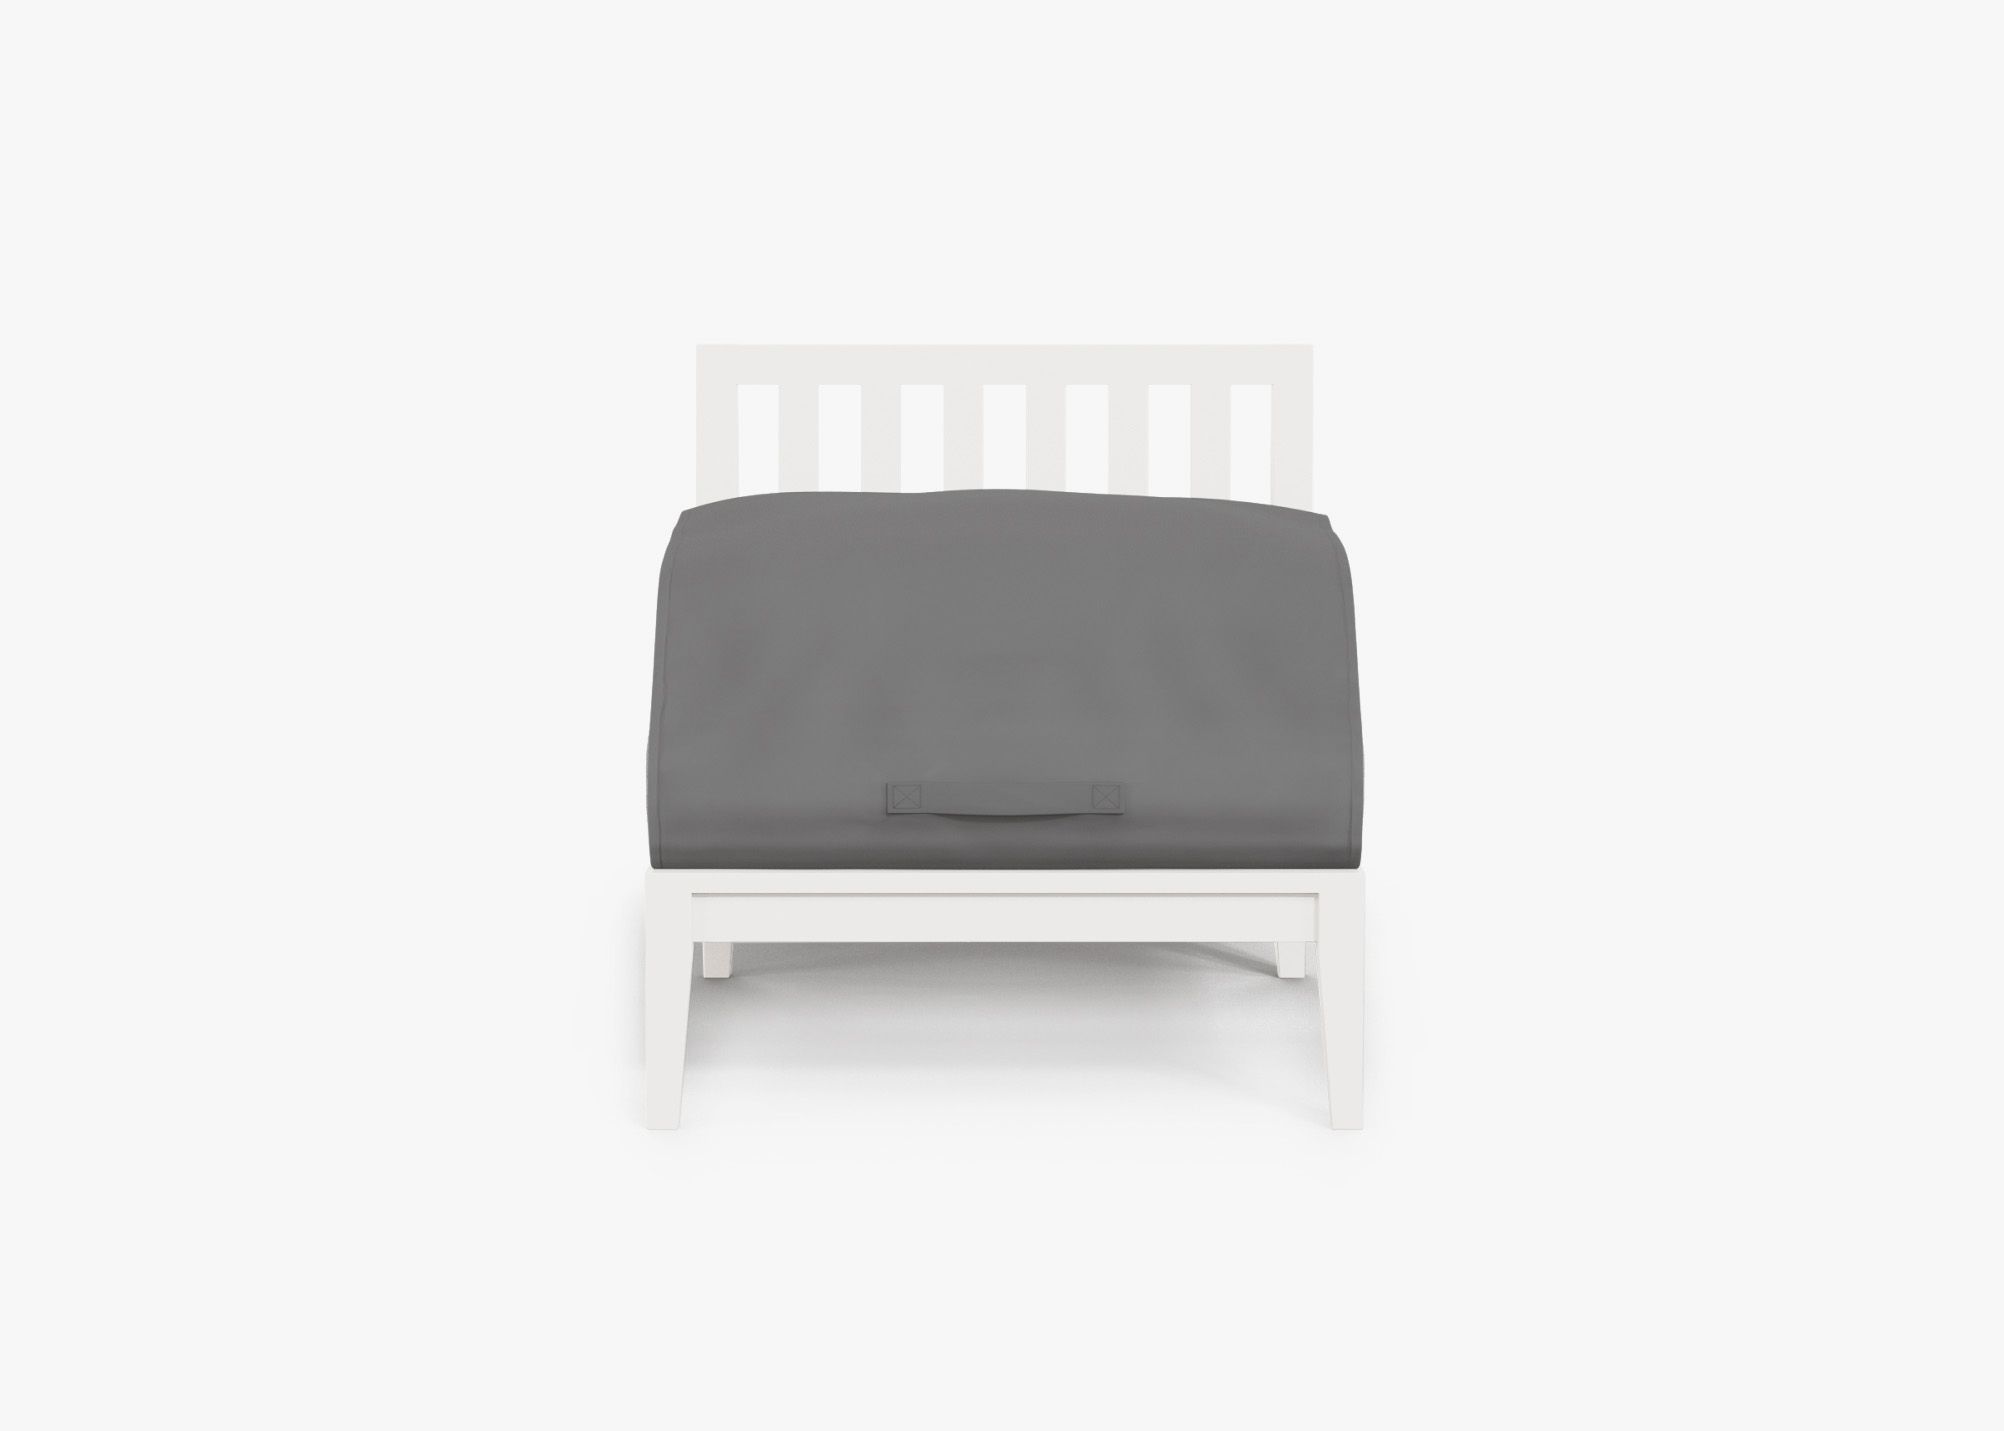 White Aluminum Outdoor Armless Chair shown with the OuterShell outdoor cushion cover, offering exclusive integrated protection.